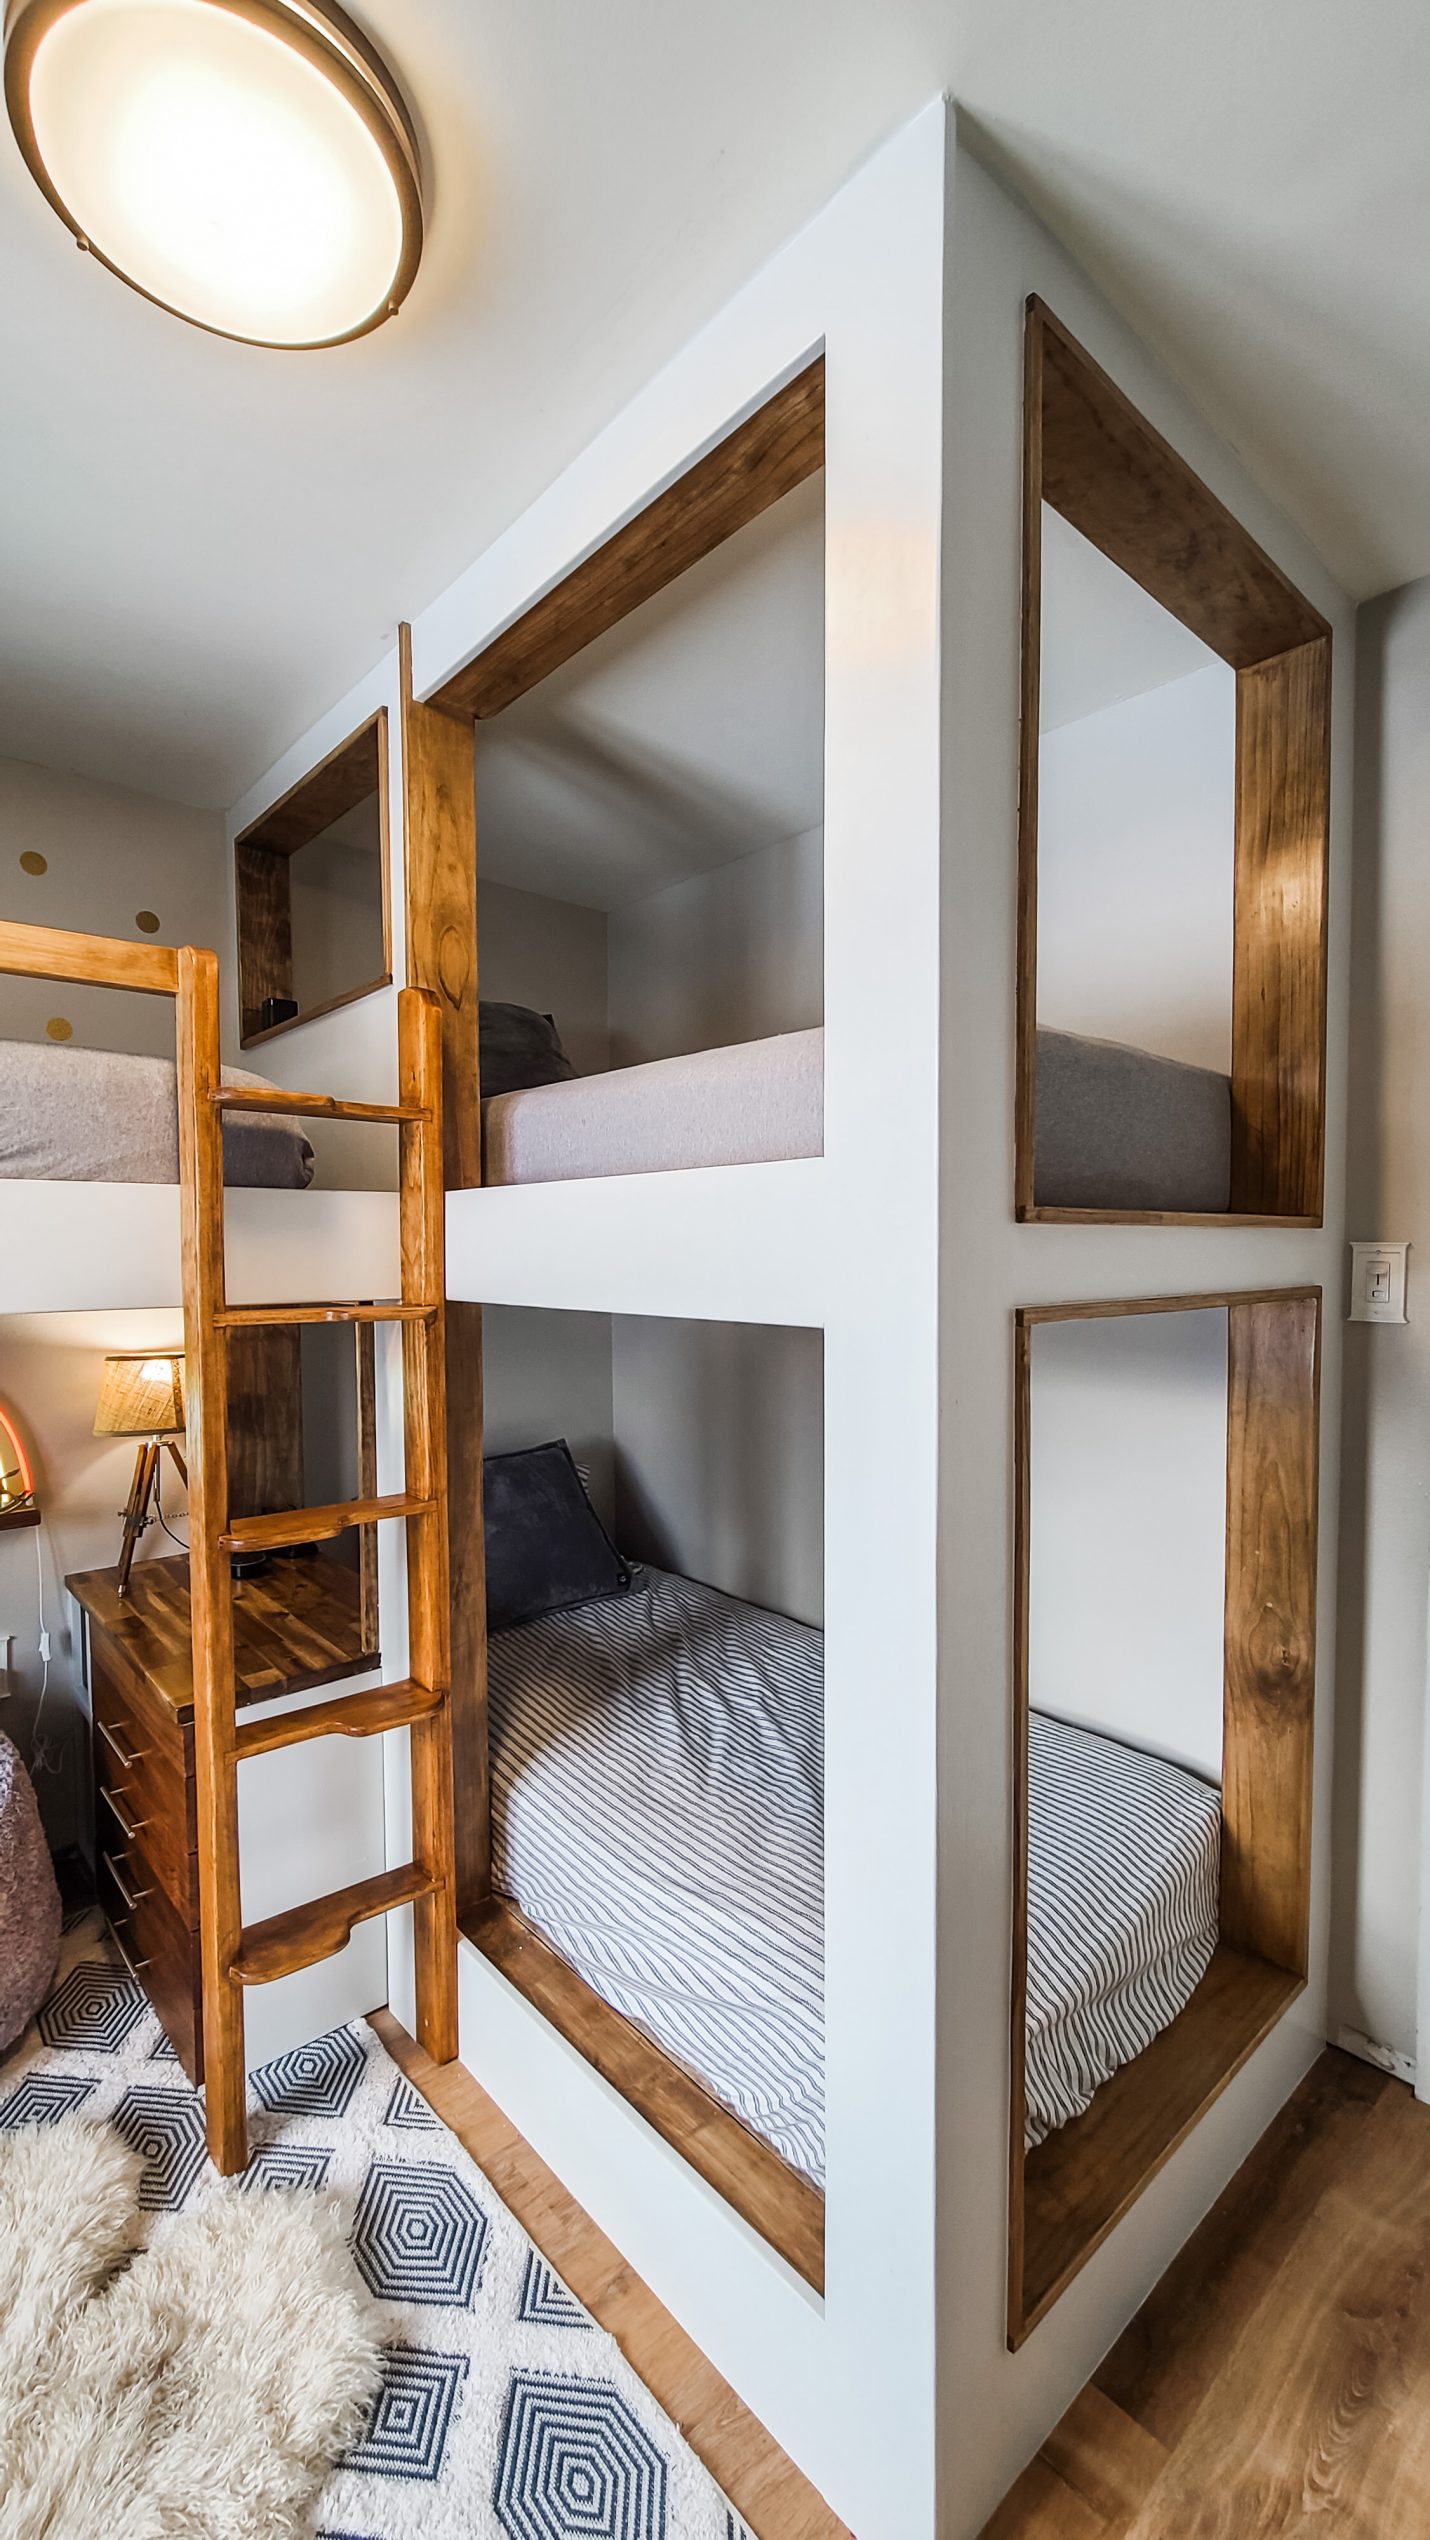 Build a space-saving DIY triple bunk bed with this complete guide - Tidy Mo